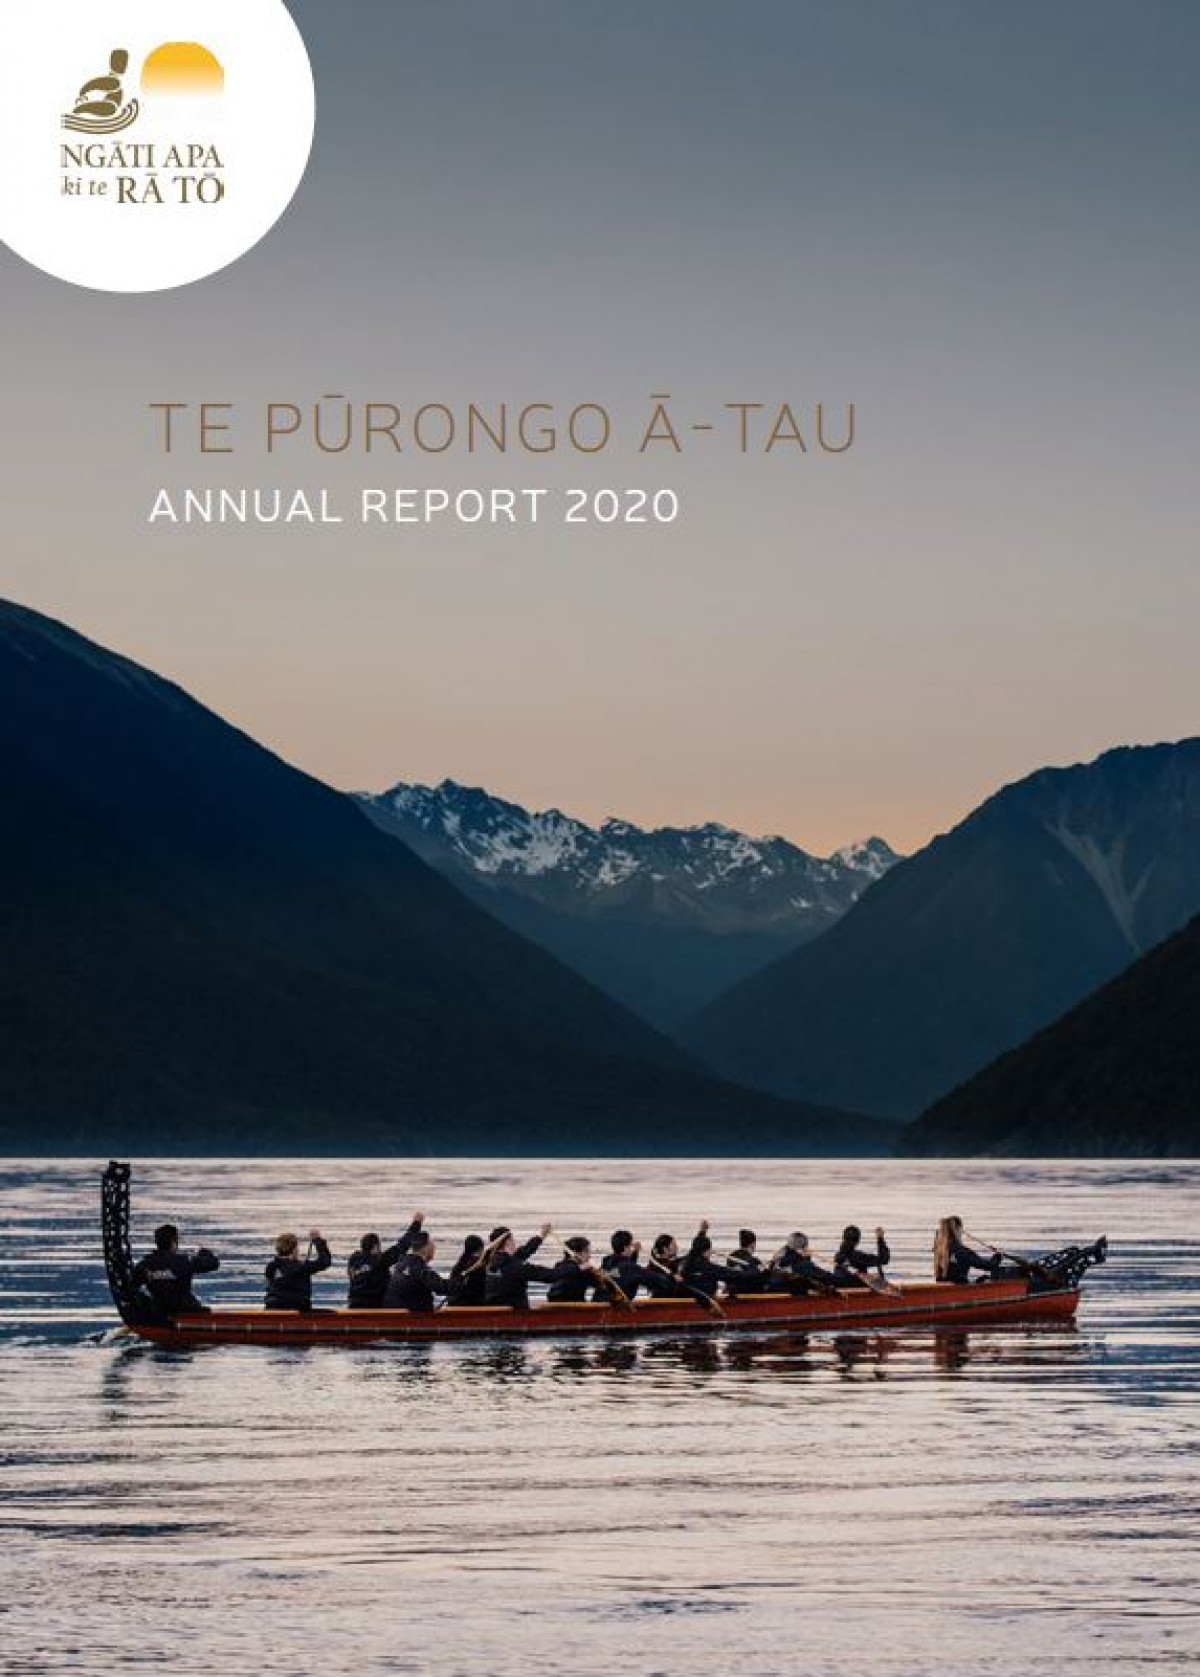 Annual Report out now